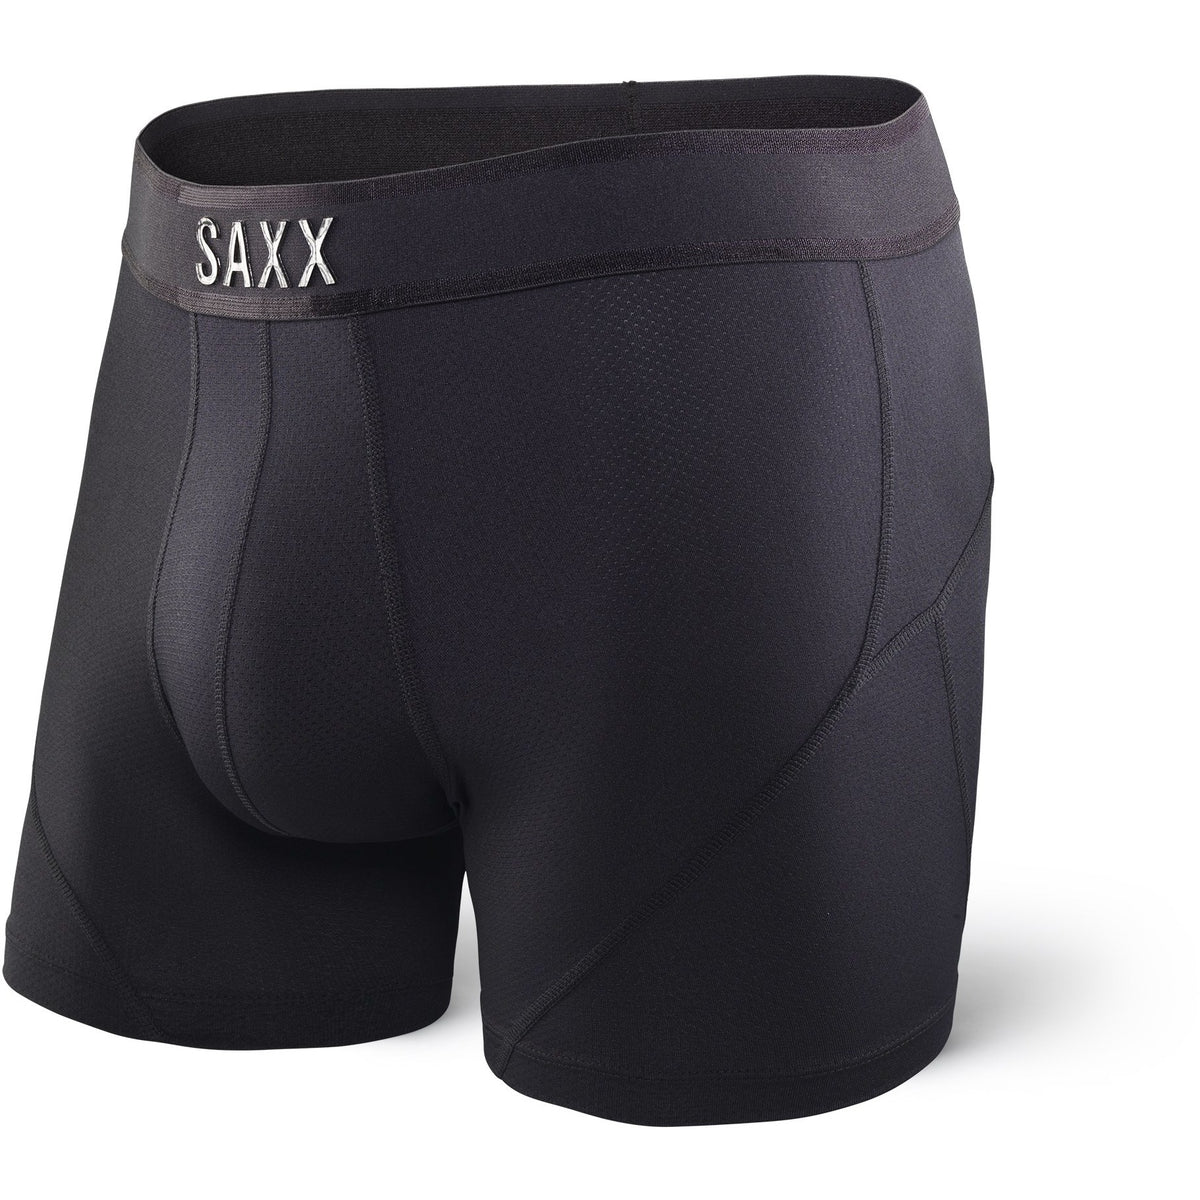 Men's quick-drying SAXX VIBE Boxer Briefs with hearts - gray. Grey